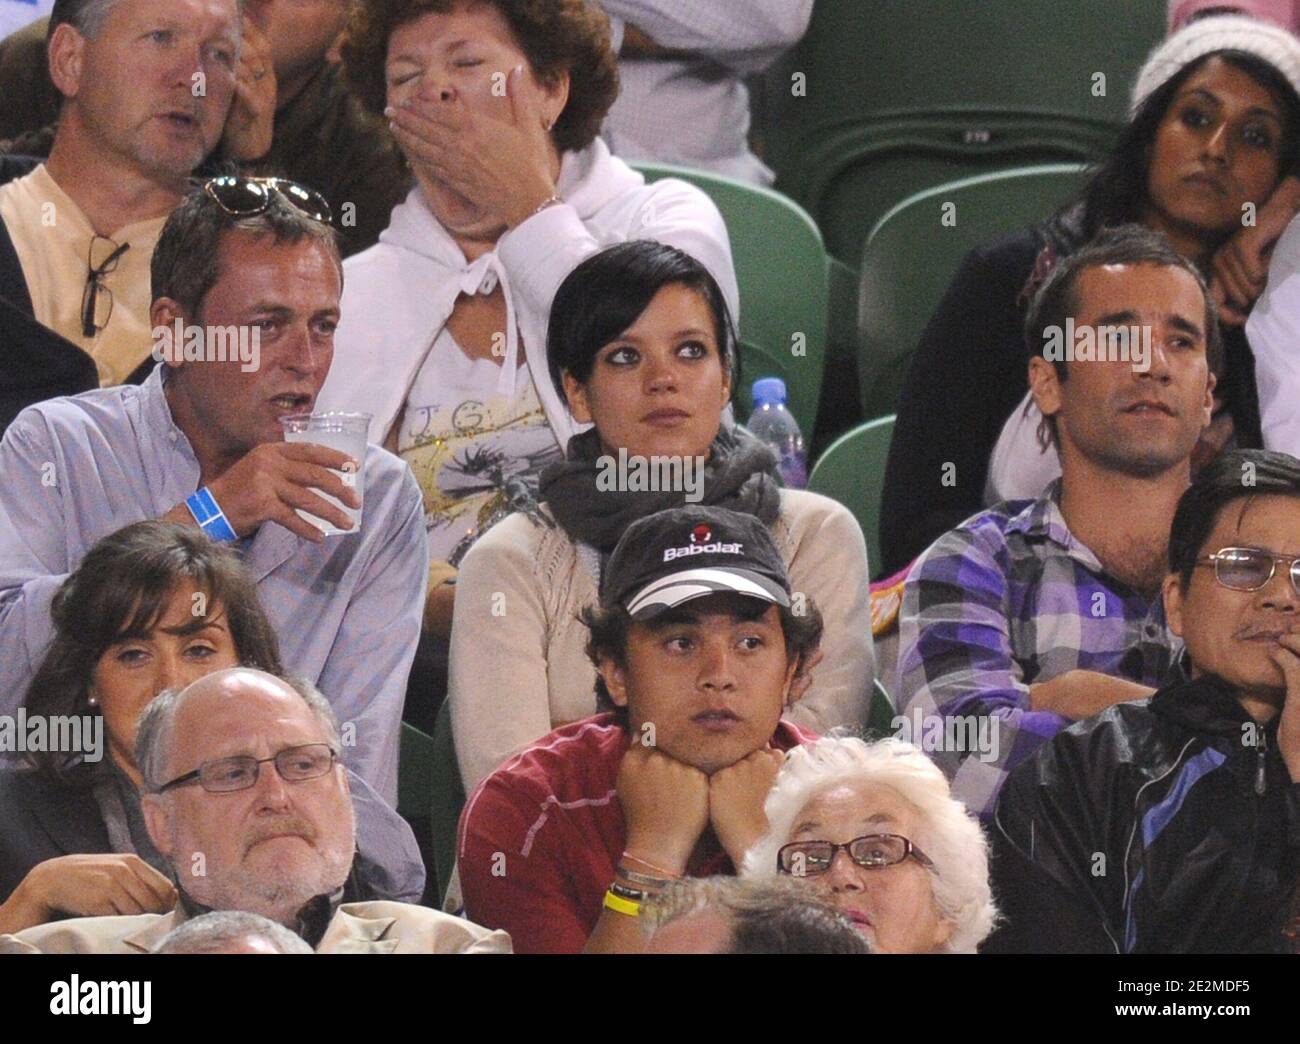 British singer Lily Allen watches the quarterfinal match between France's Jo-Wilfried Tsonga against Serbia's Novak Djokovic on day 10 of the Australian Open tennis tournament in Melbourne, Australia on January 27, 2010. Jo-Wilfried Tsonga moved into the Australian Open semi-finals. Photo by Corinne Dubreuil/Cameleon/ABACAPRESS.COM Stock Photo